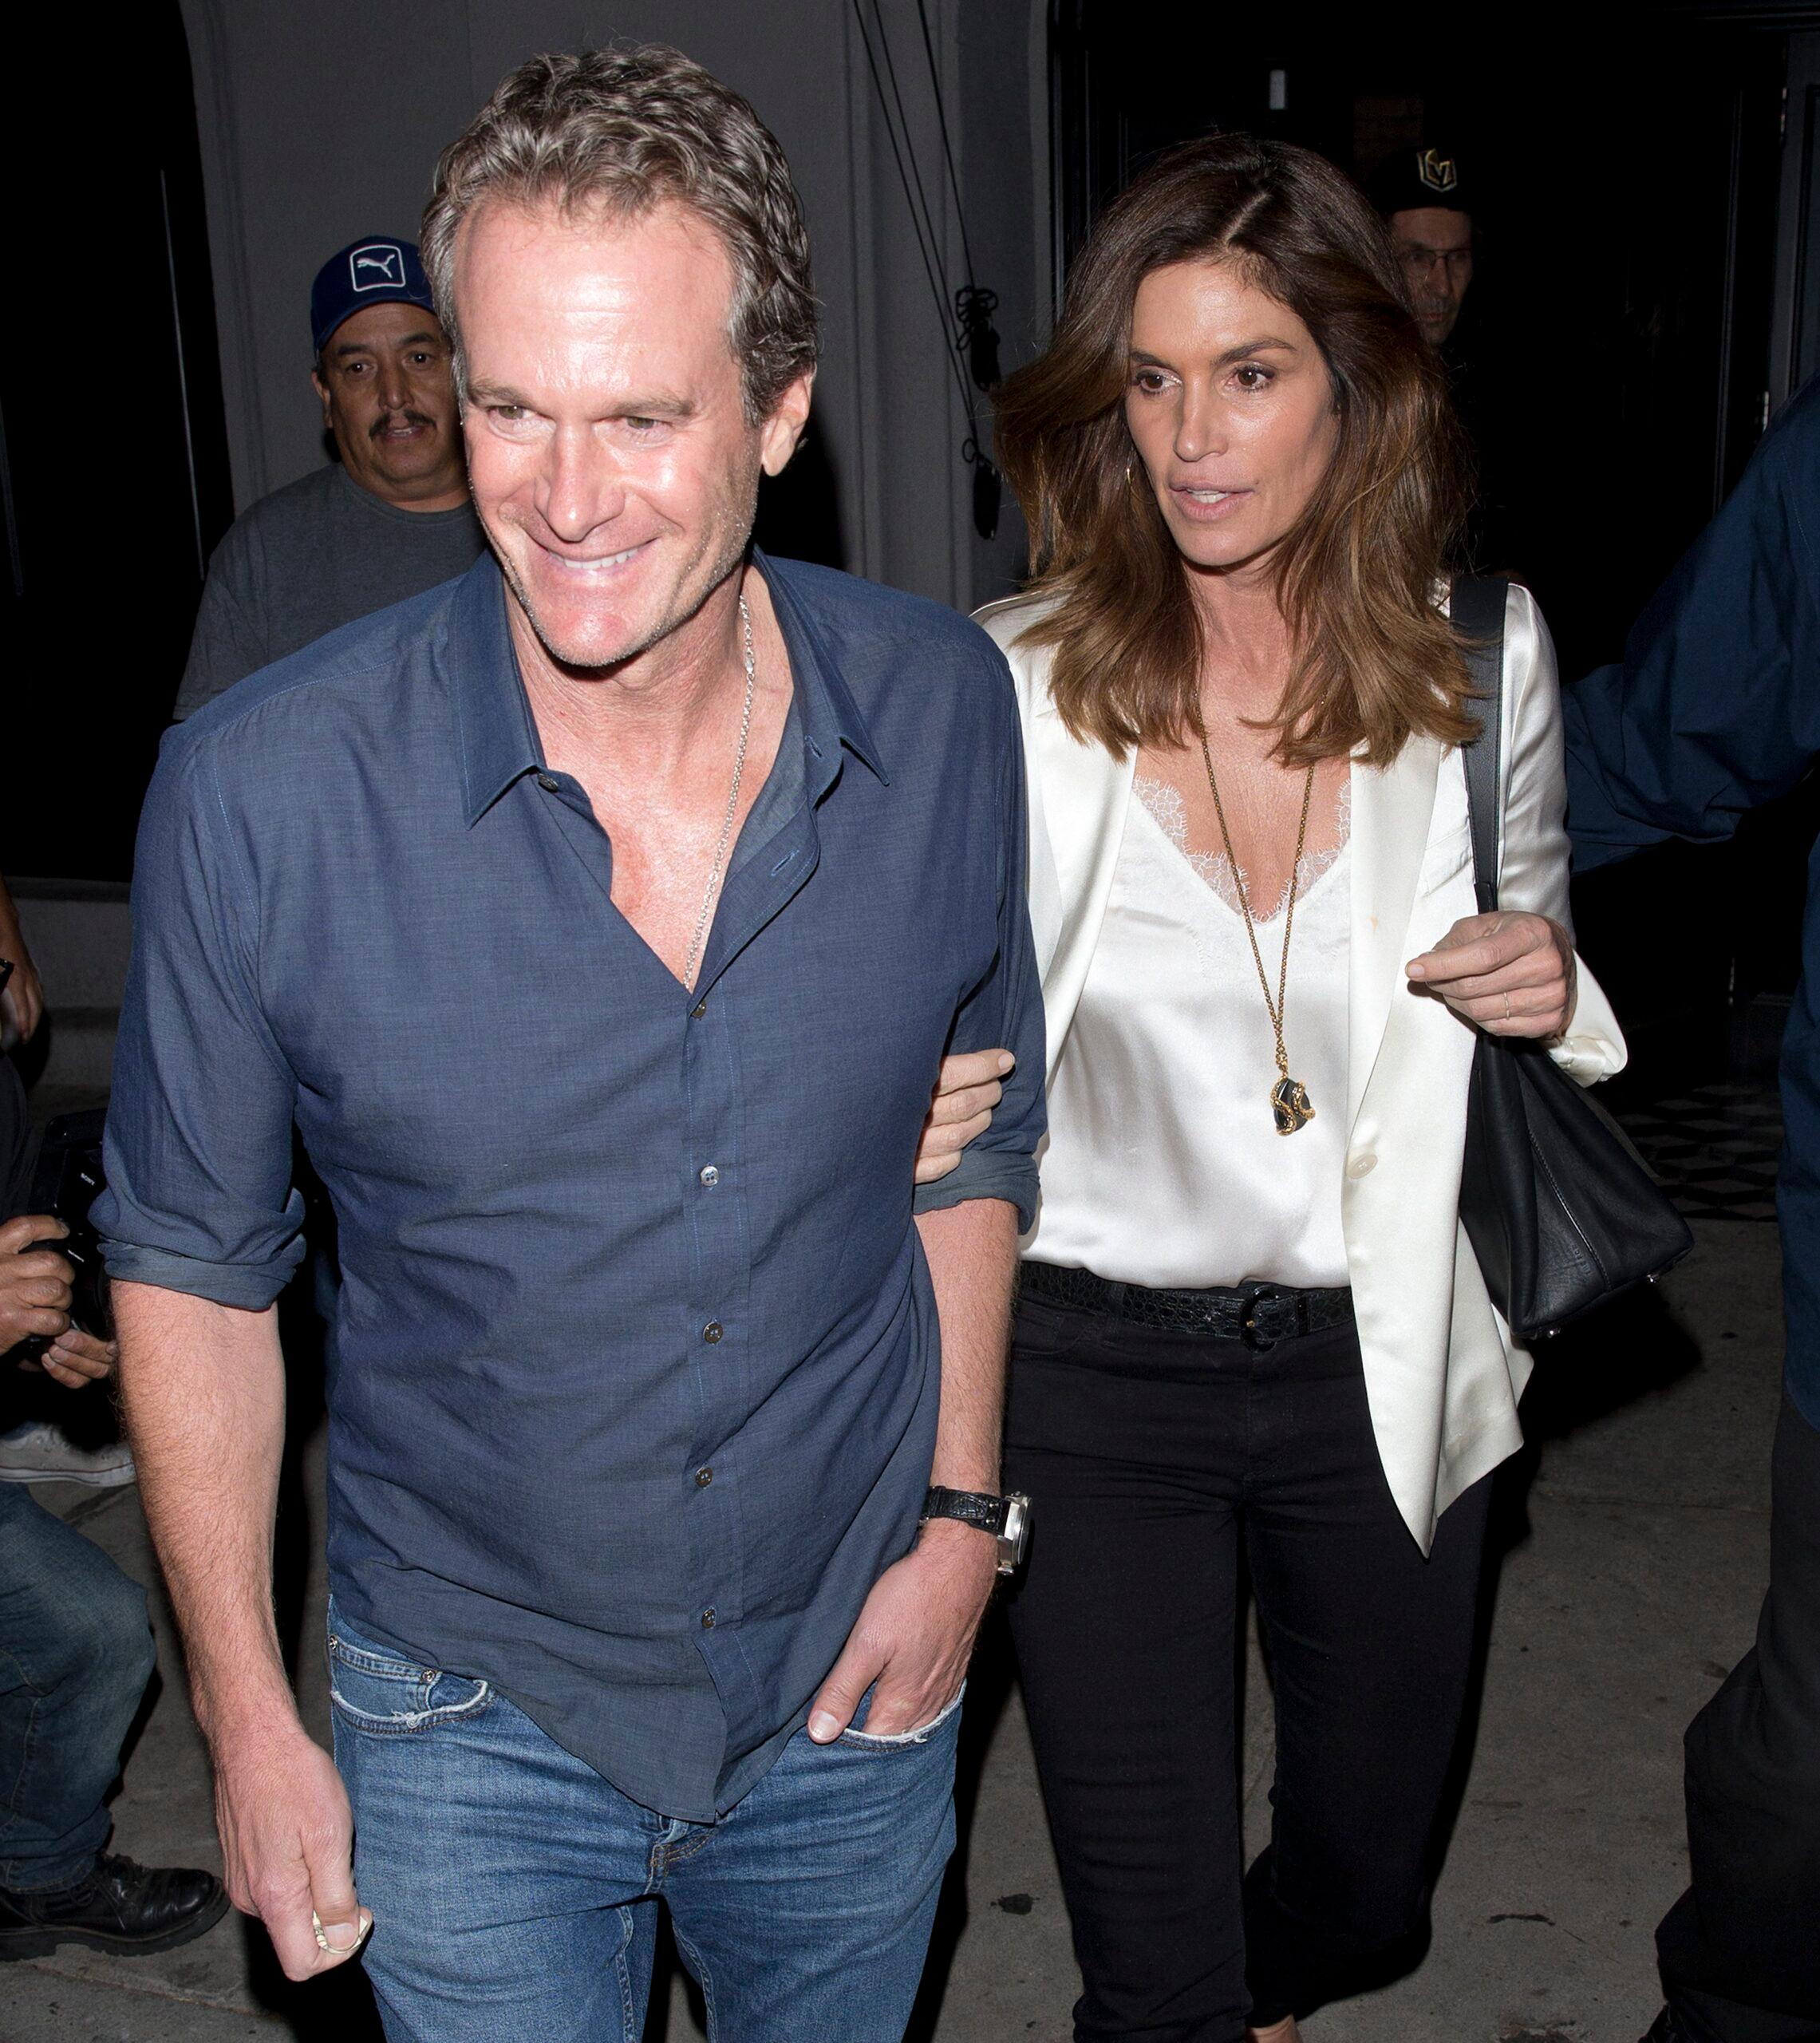 Cindy Crawford Marks 25 Years Of Marriage To Rande Gerber With Gorgeous Throwback Photos Of Their Wedding Day